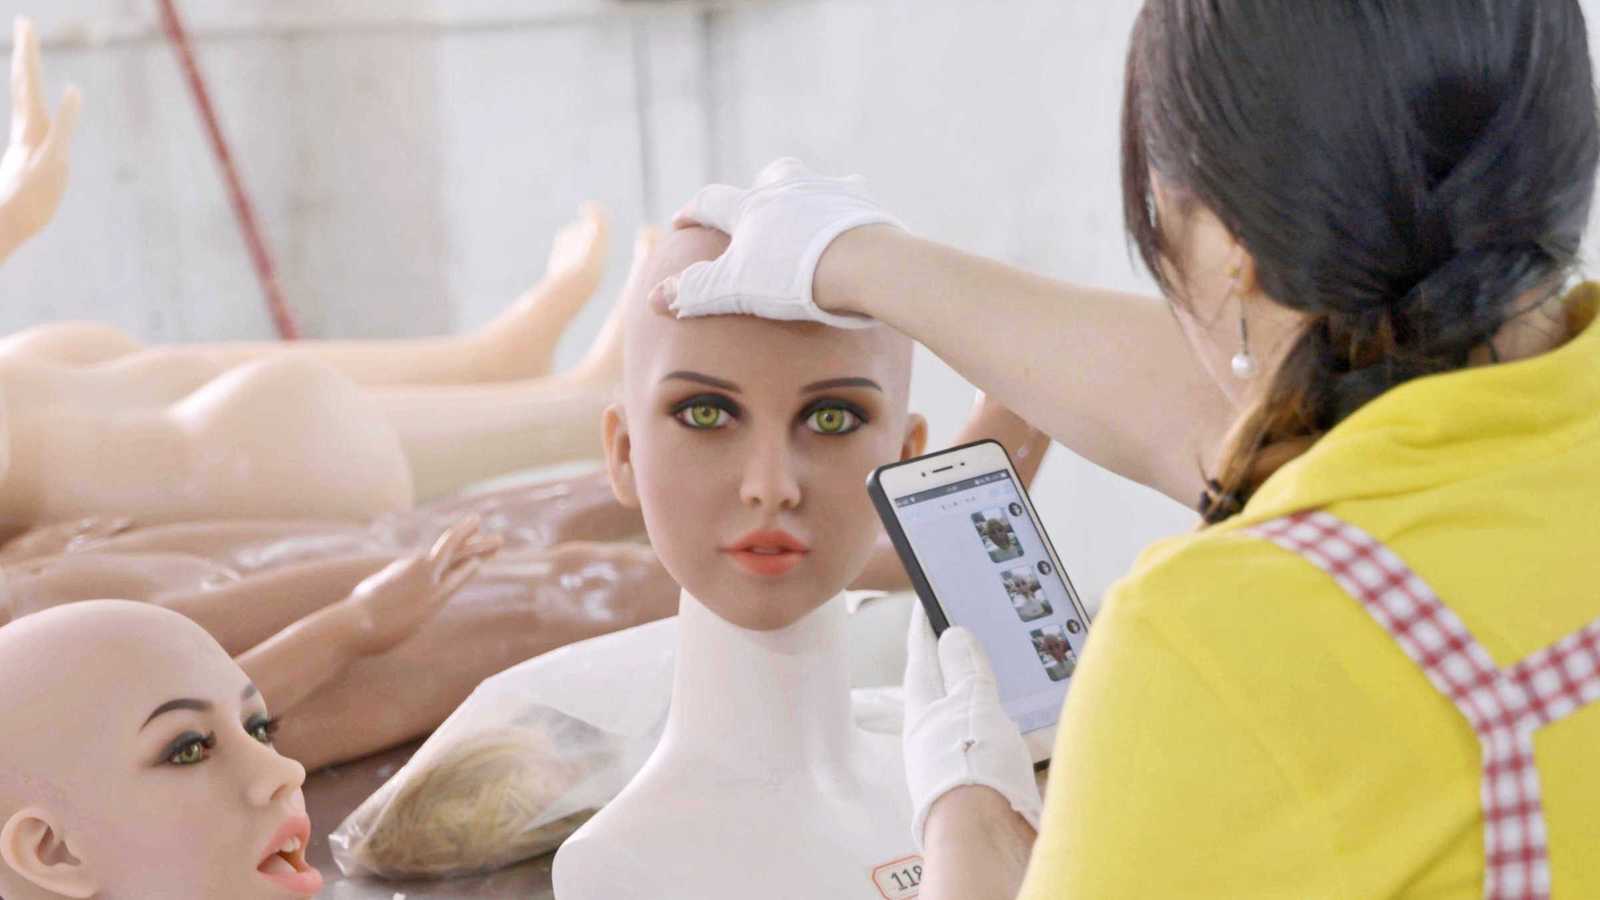 A factory worker holds the head of a plastic mannequin, which is directly facing the camera.